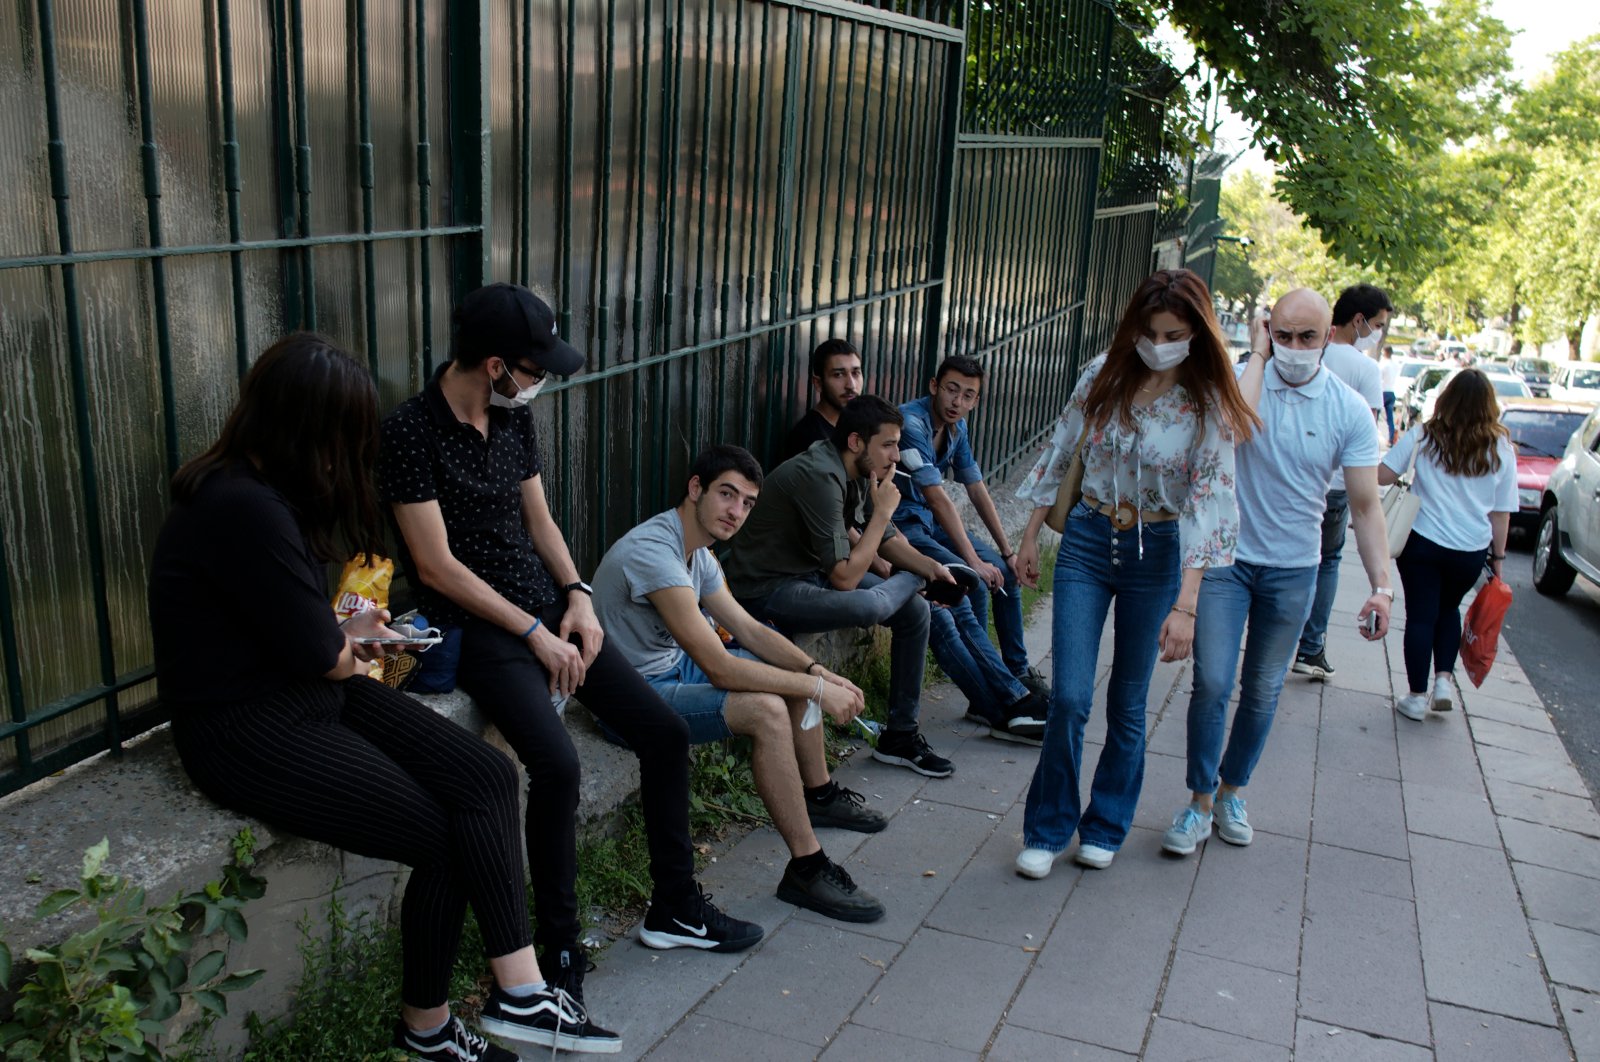 People wearing face masks to protect against the spread of coronavirus, walk past others without face coverings, in Ankara, Monday, June 29, 2020. (AP Photo)